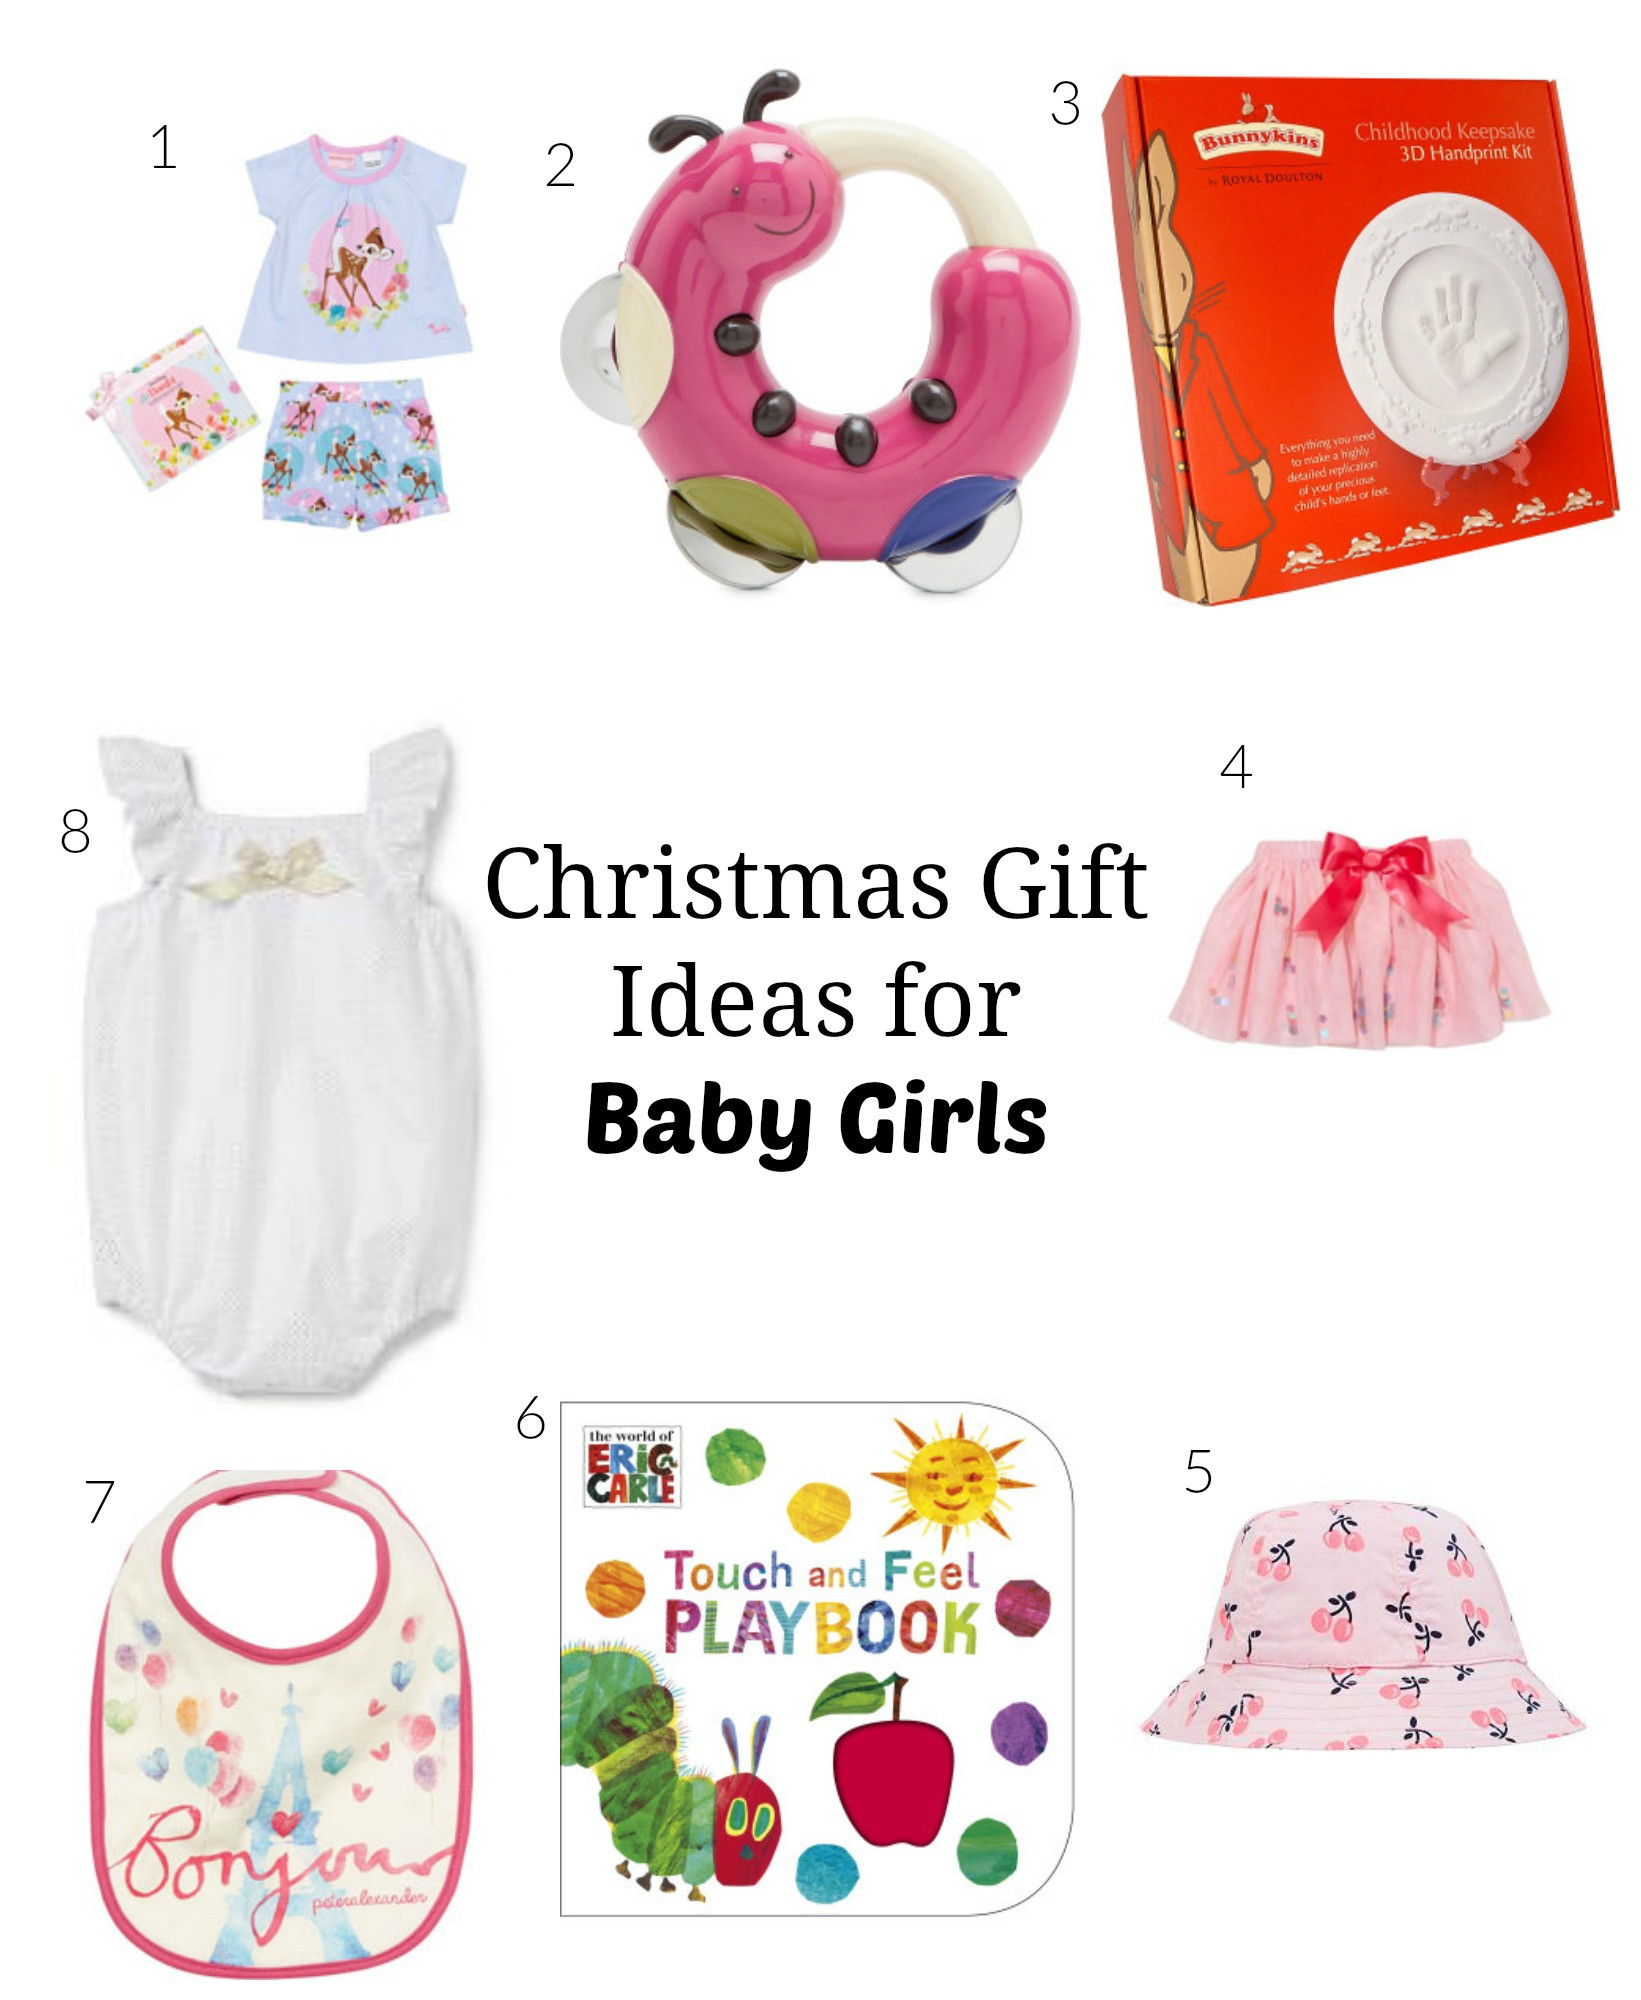 Gift Ideas For Baby Girls
 Go Ask Mum Christmas Gifts for Baby Girls Under $40 Go